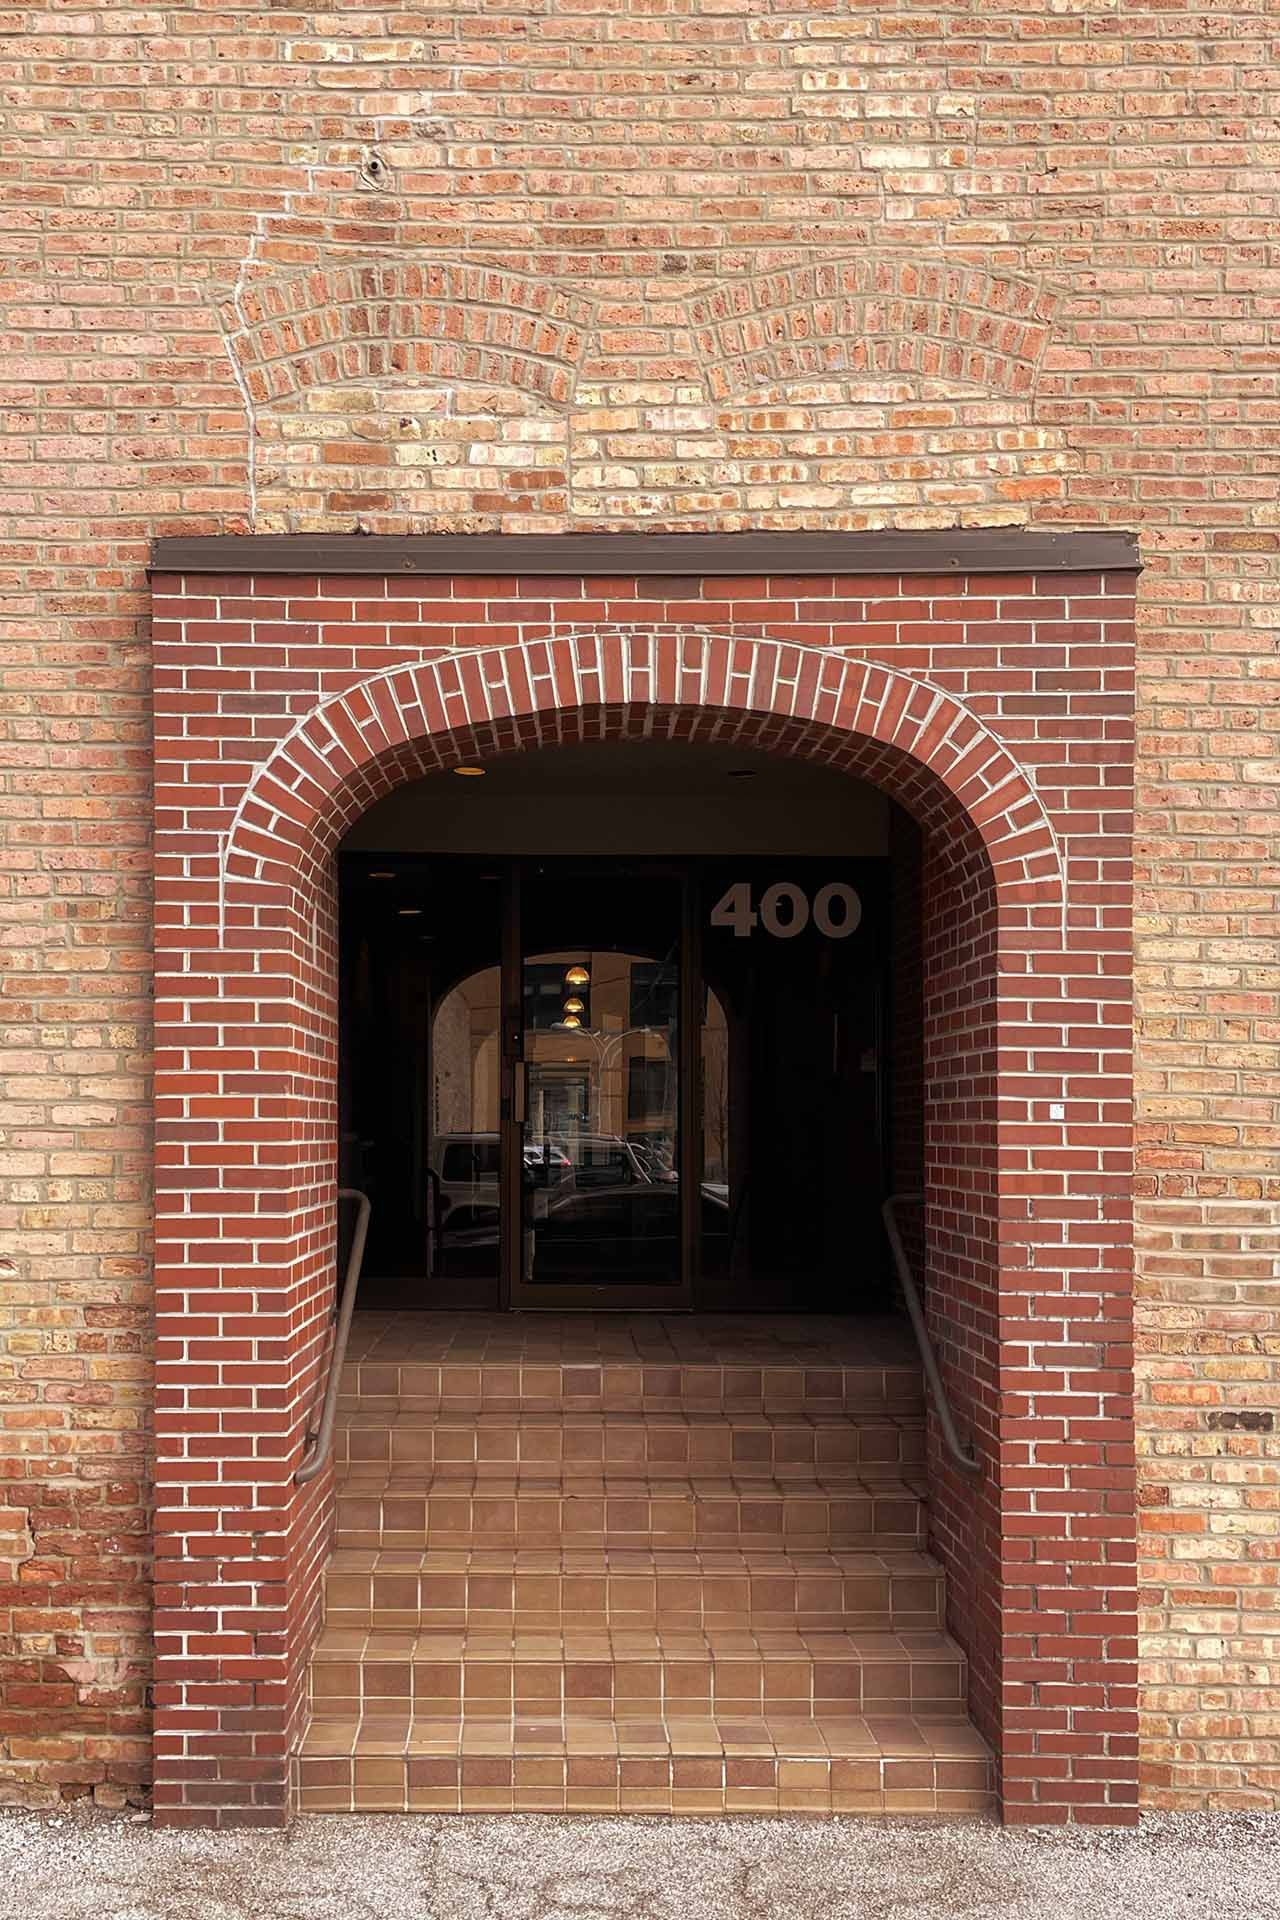 An entryway arch cutting through two previously bricked in windows